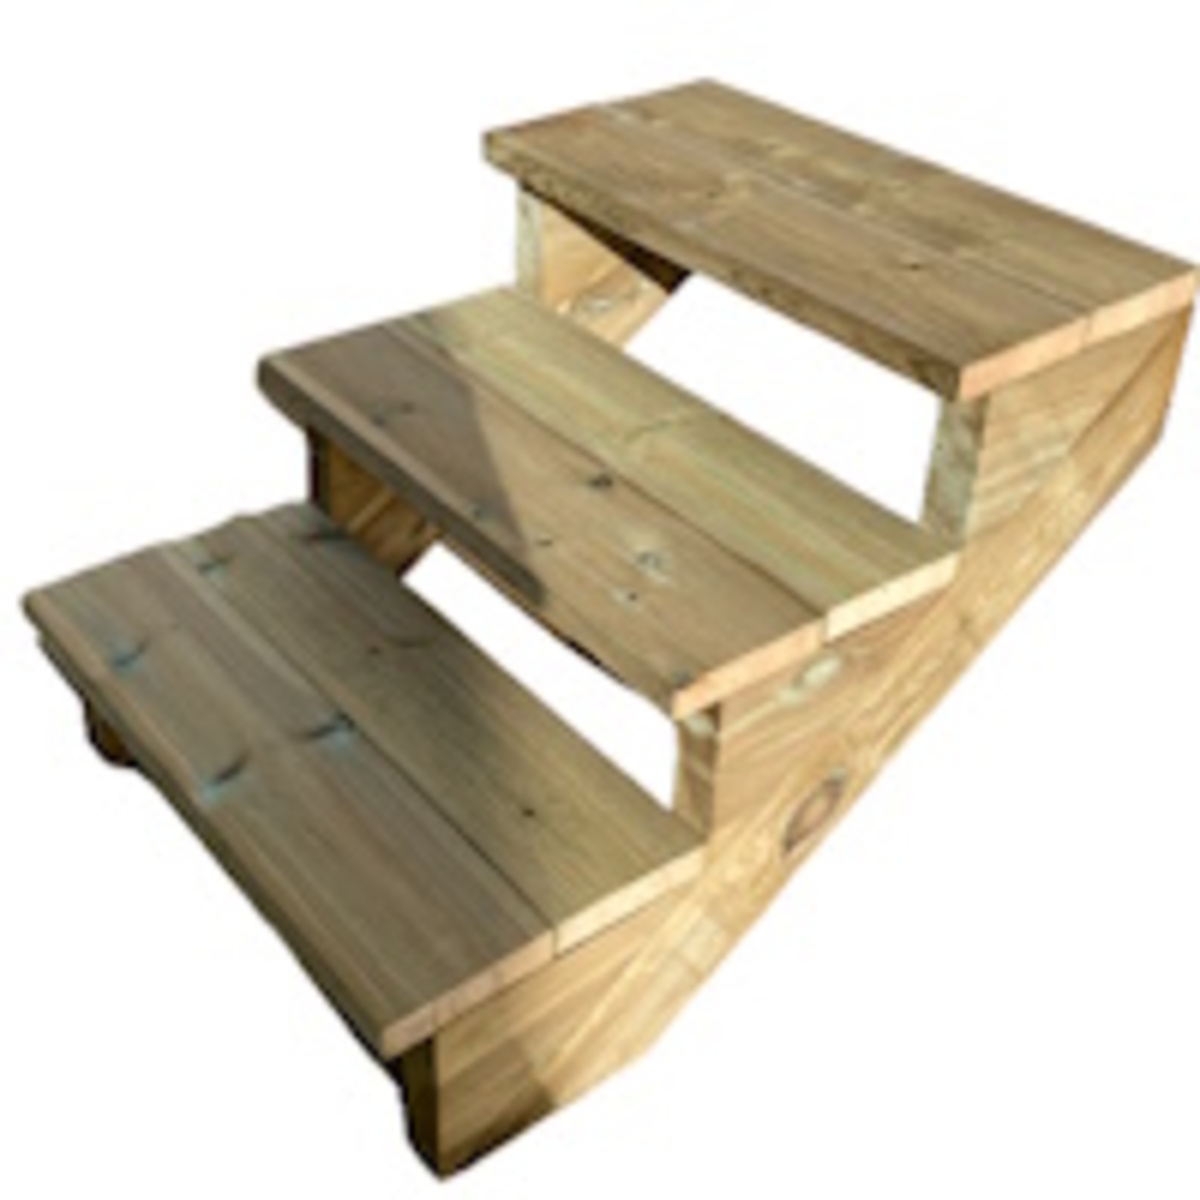 Deck stairs wood 3 steps type C - height 54cm